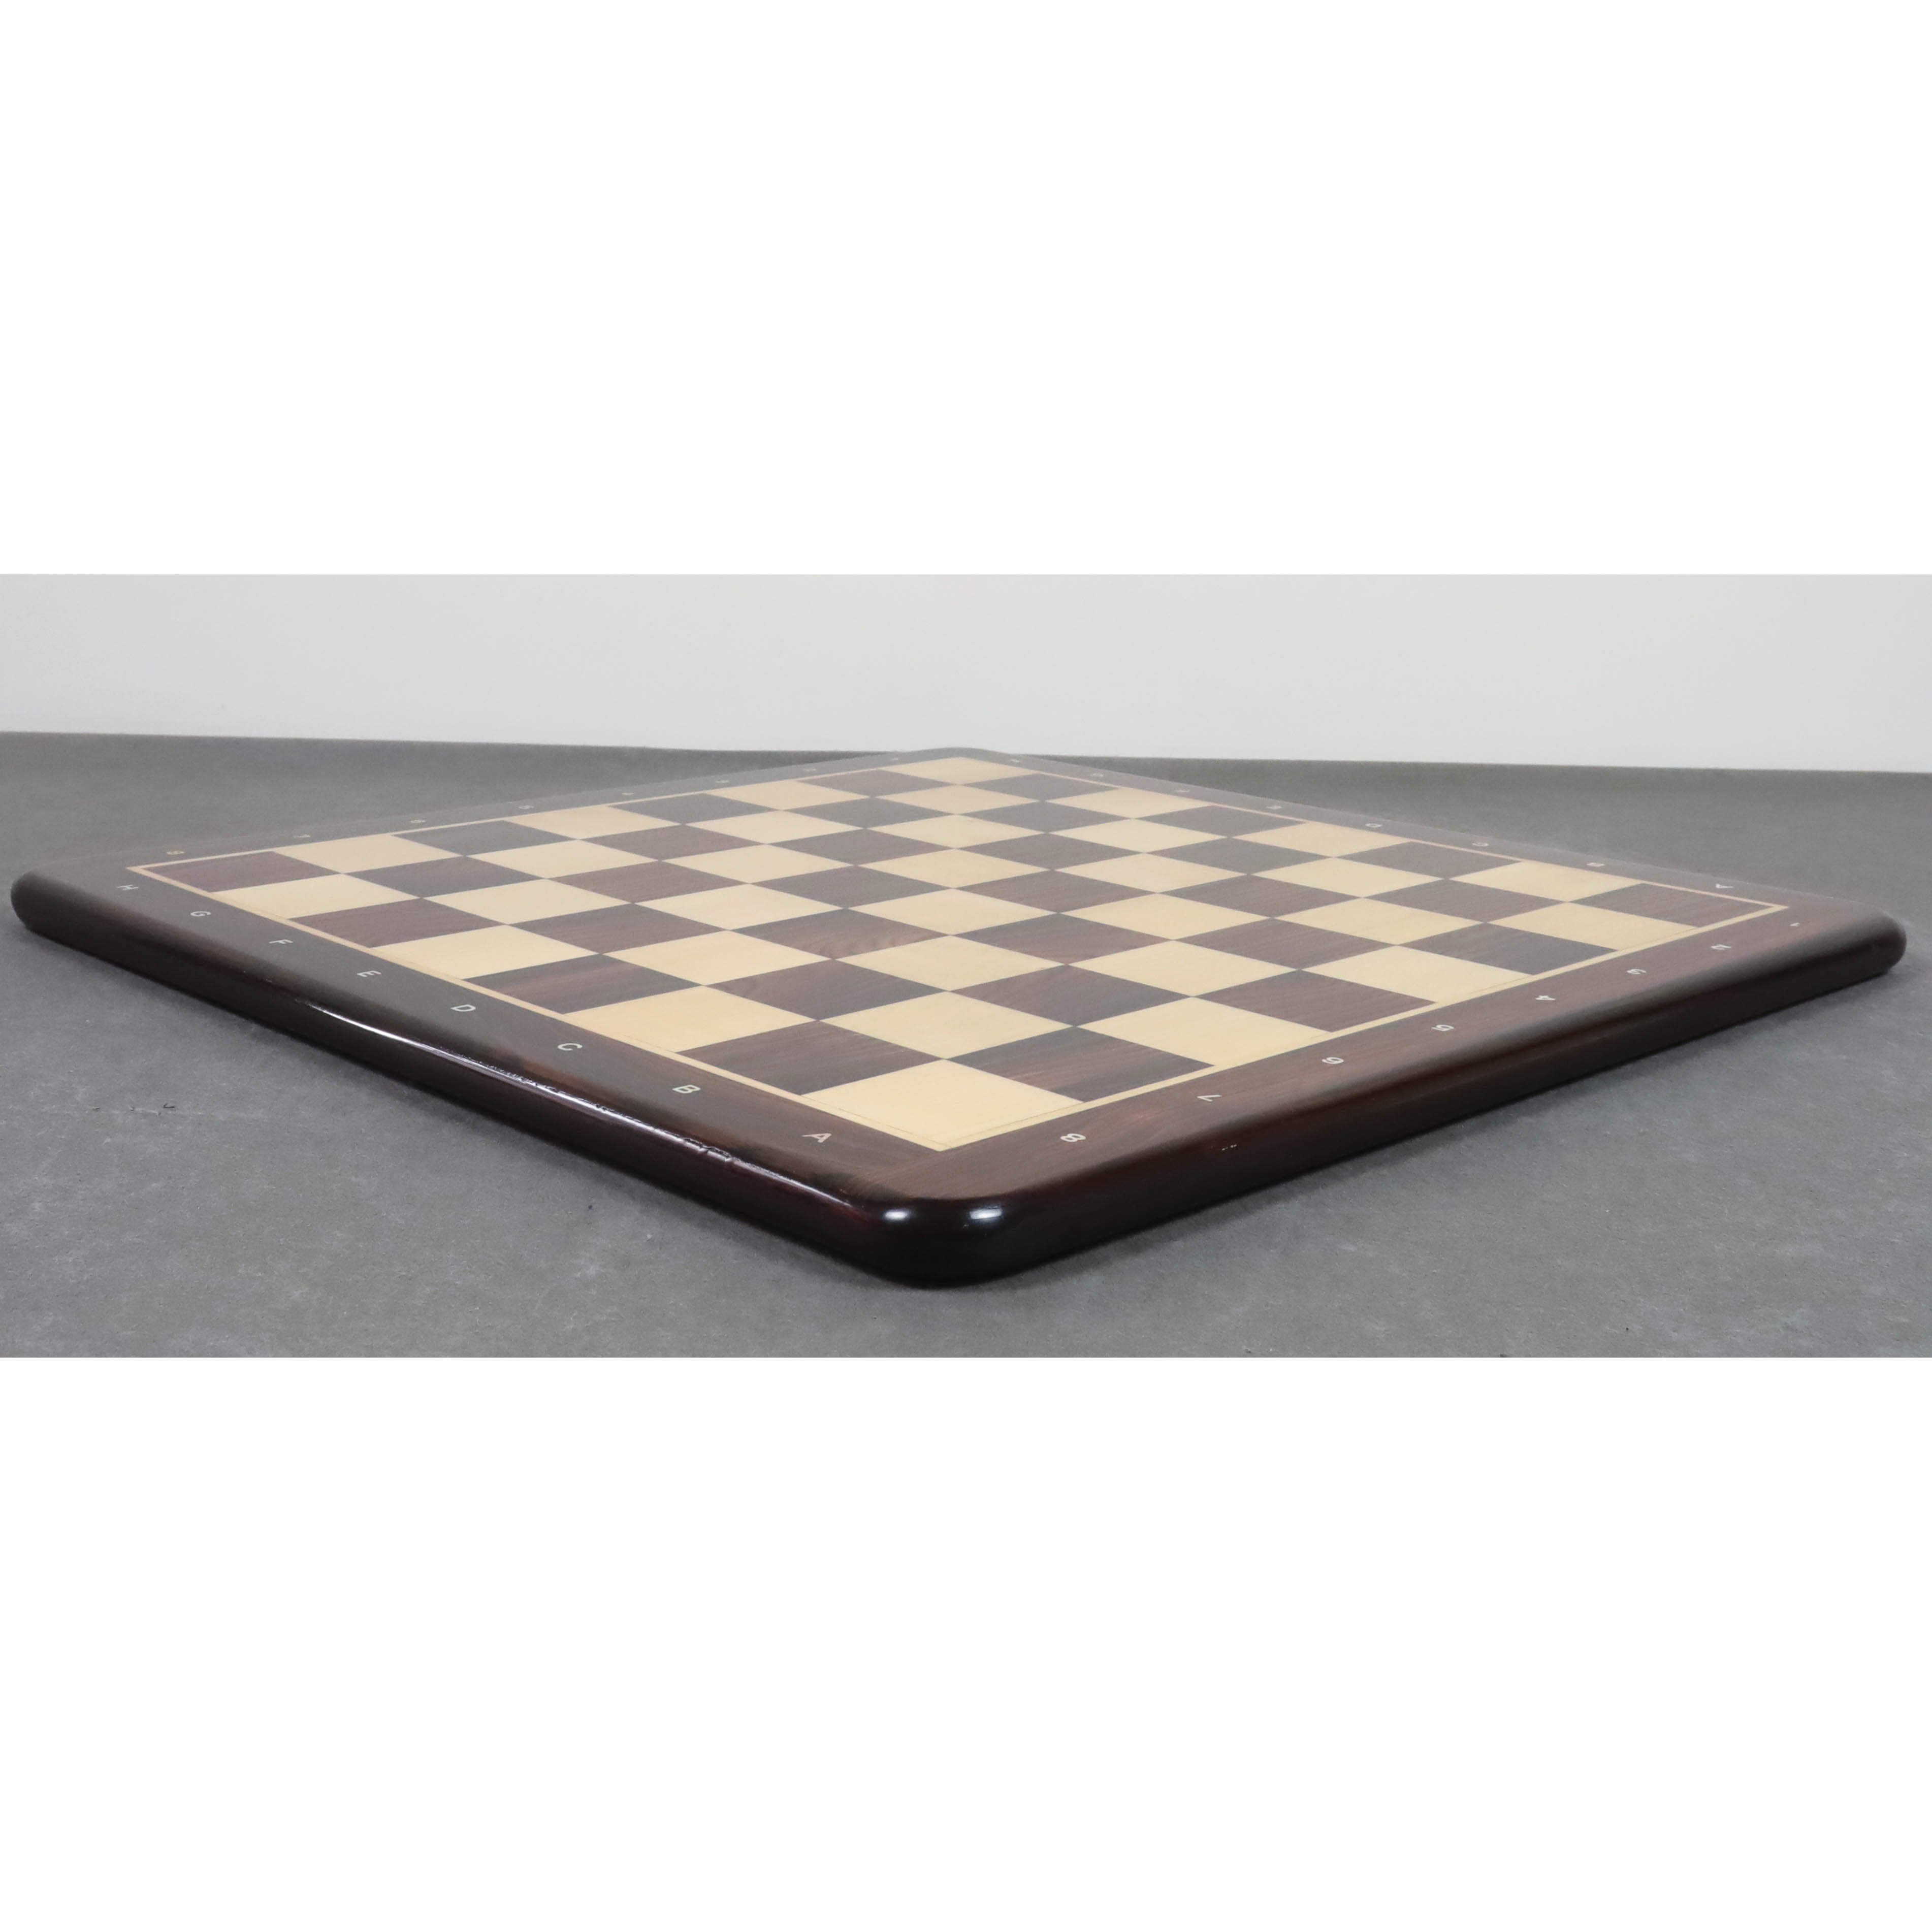 Flat Chessboard in Rosewood & Maple Wood - Tournament Chess Pieces